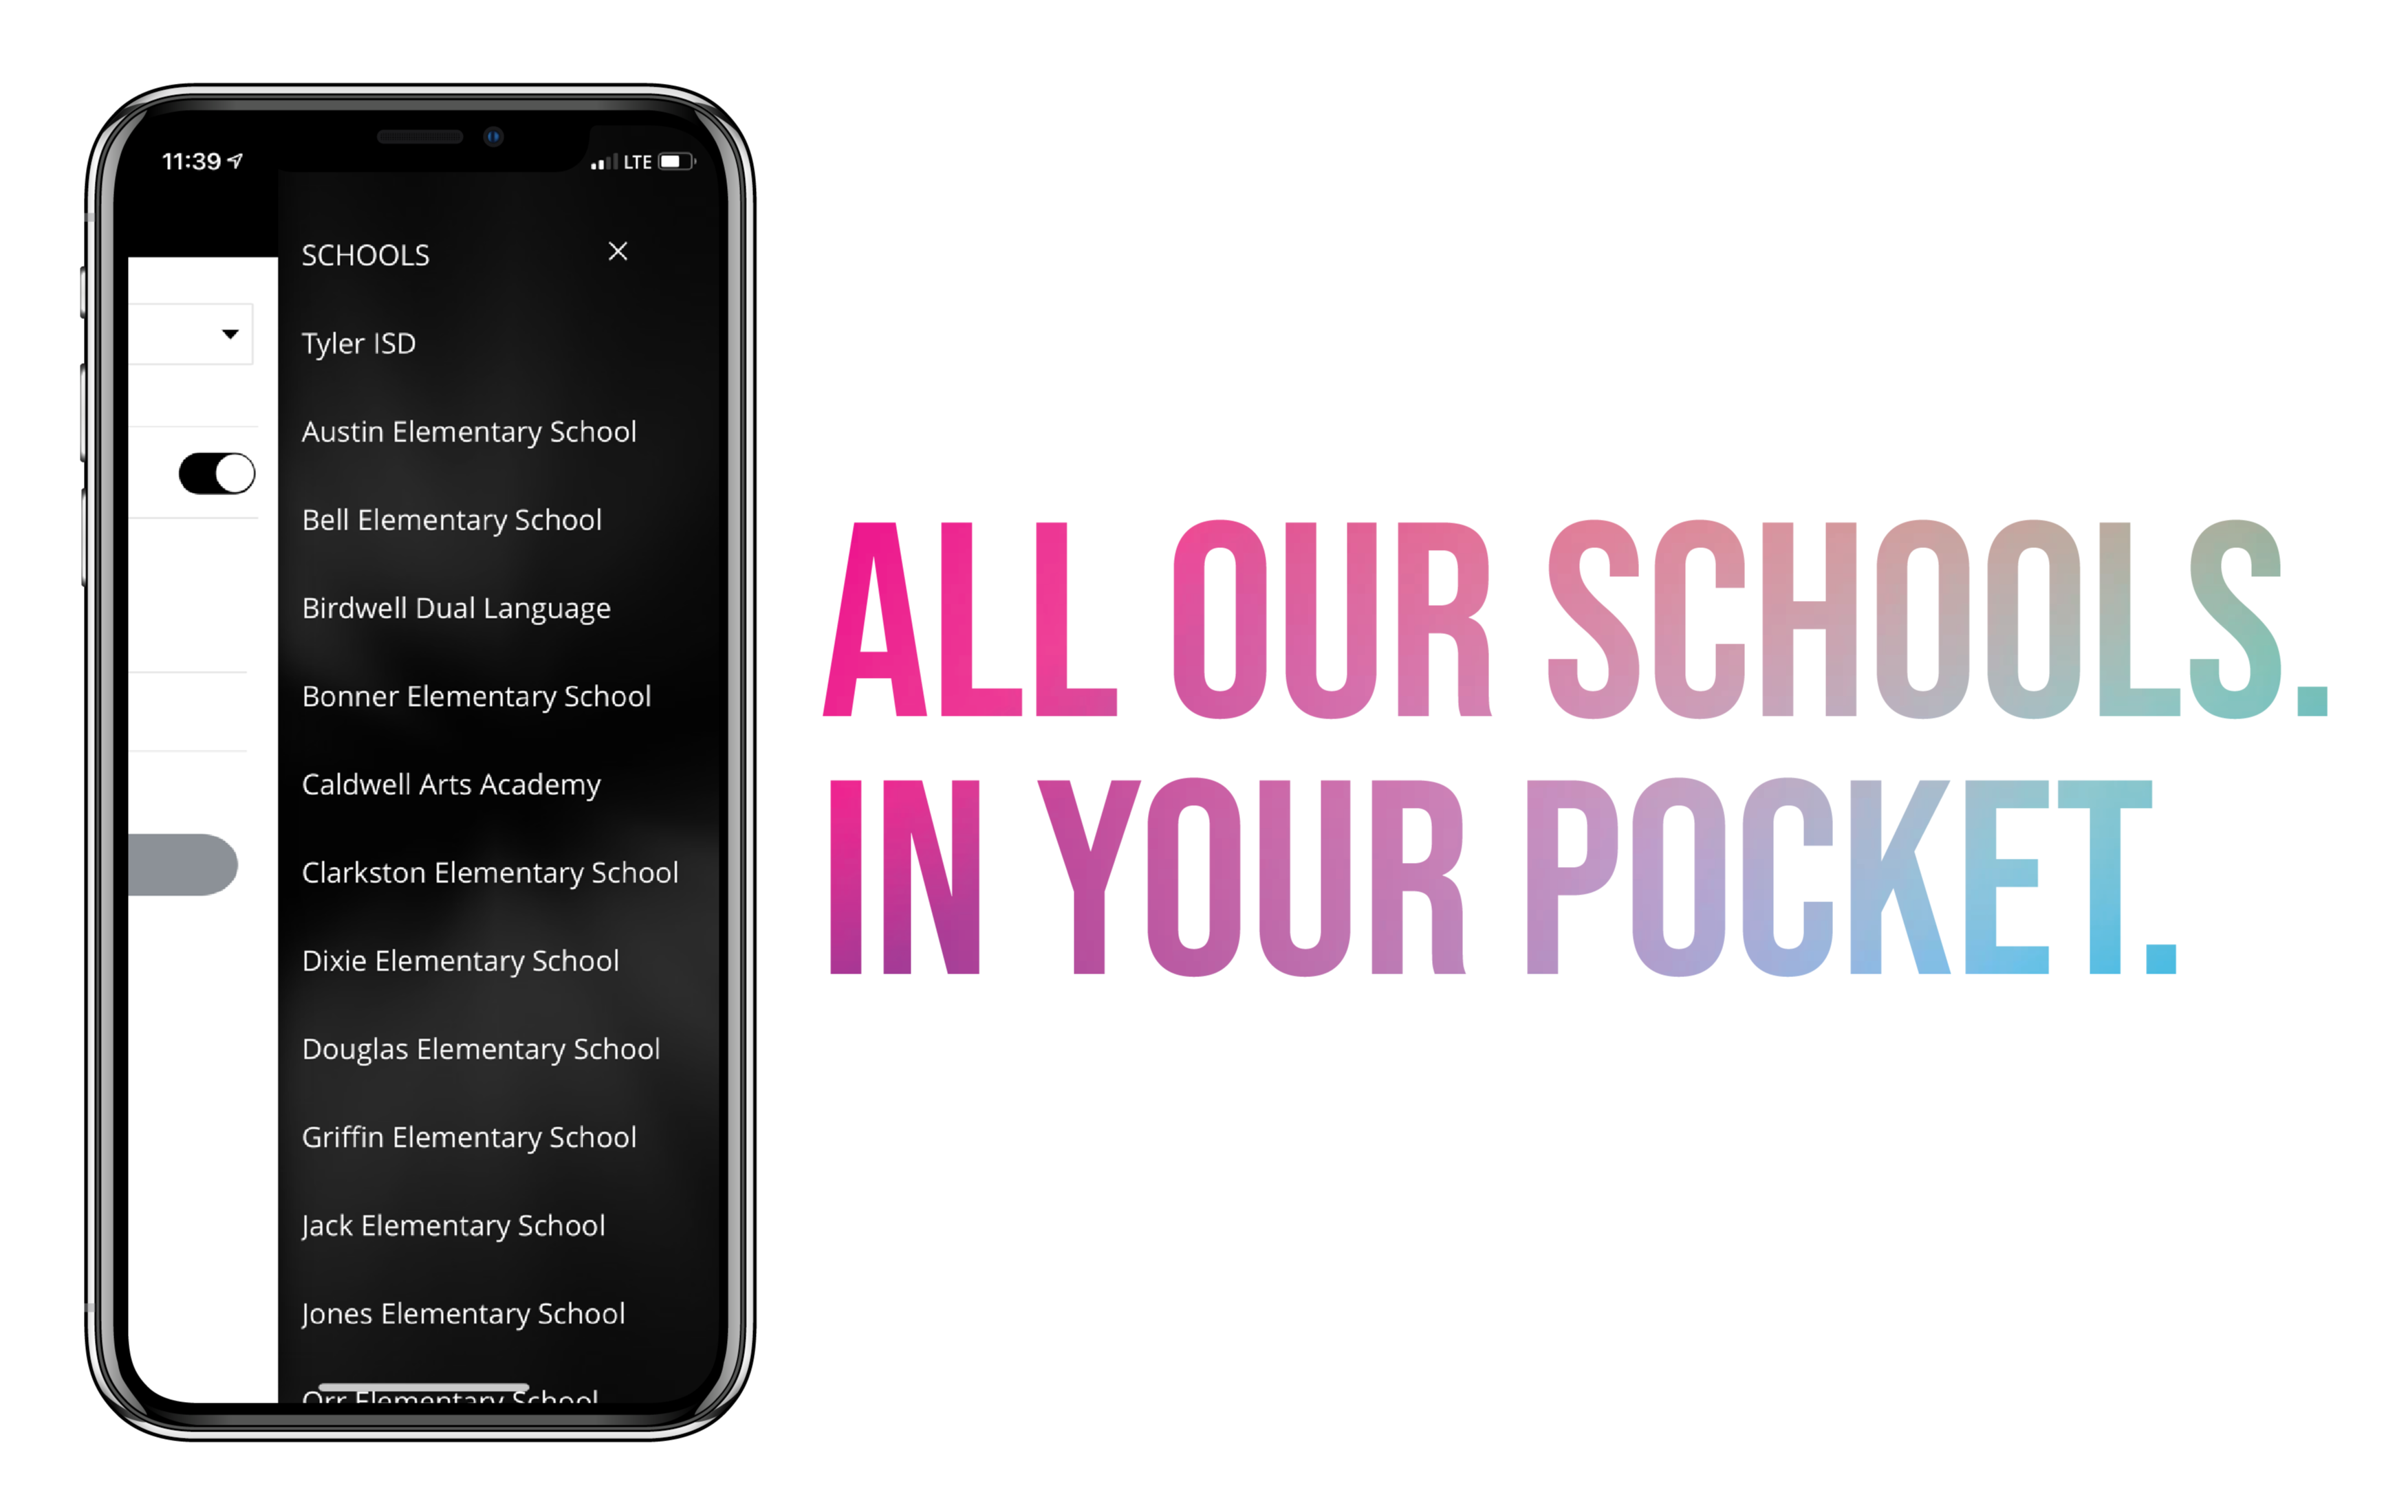 all our schools. in your pocket.